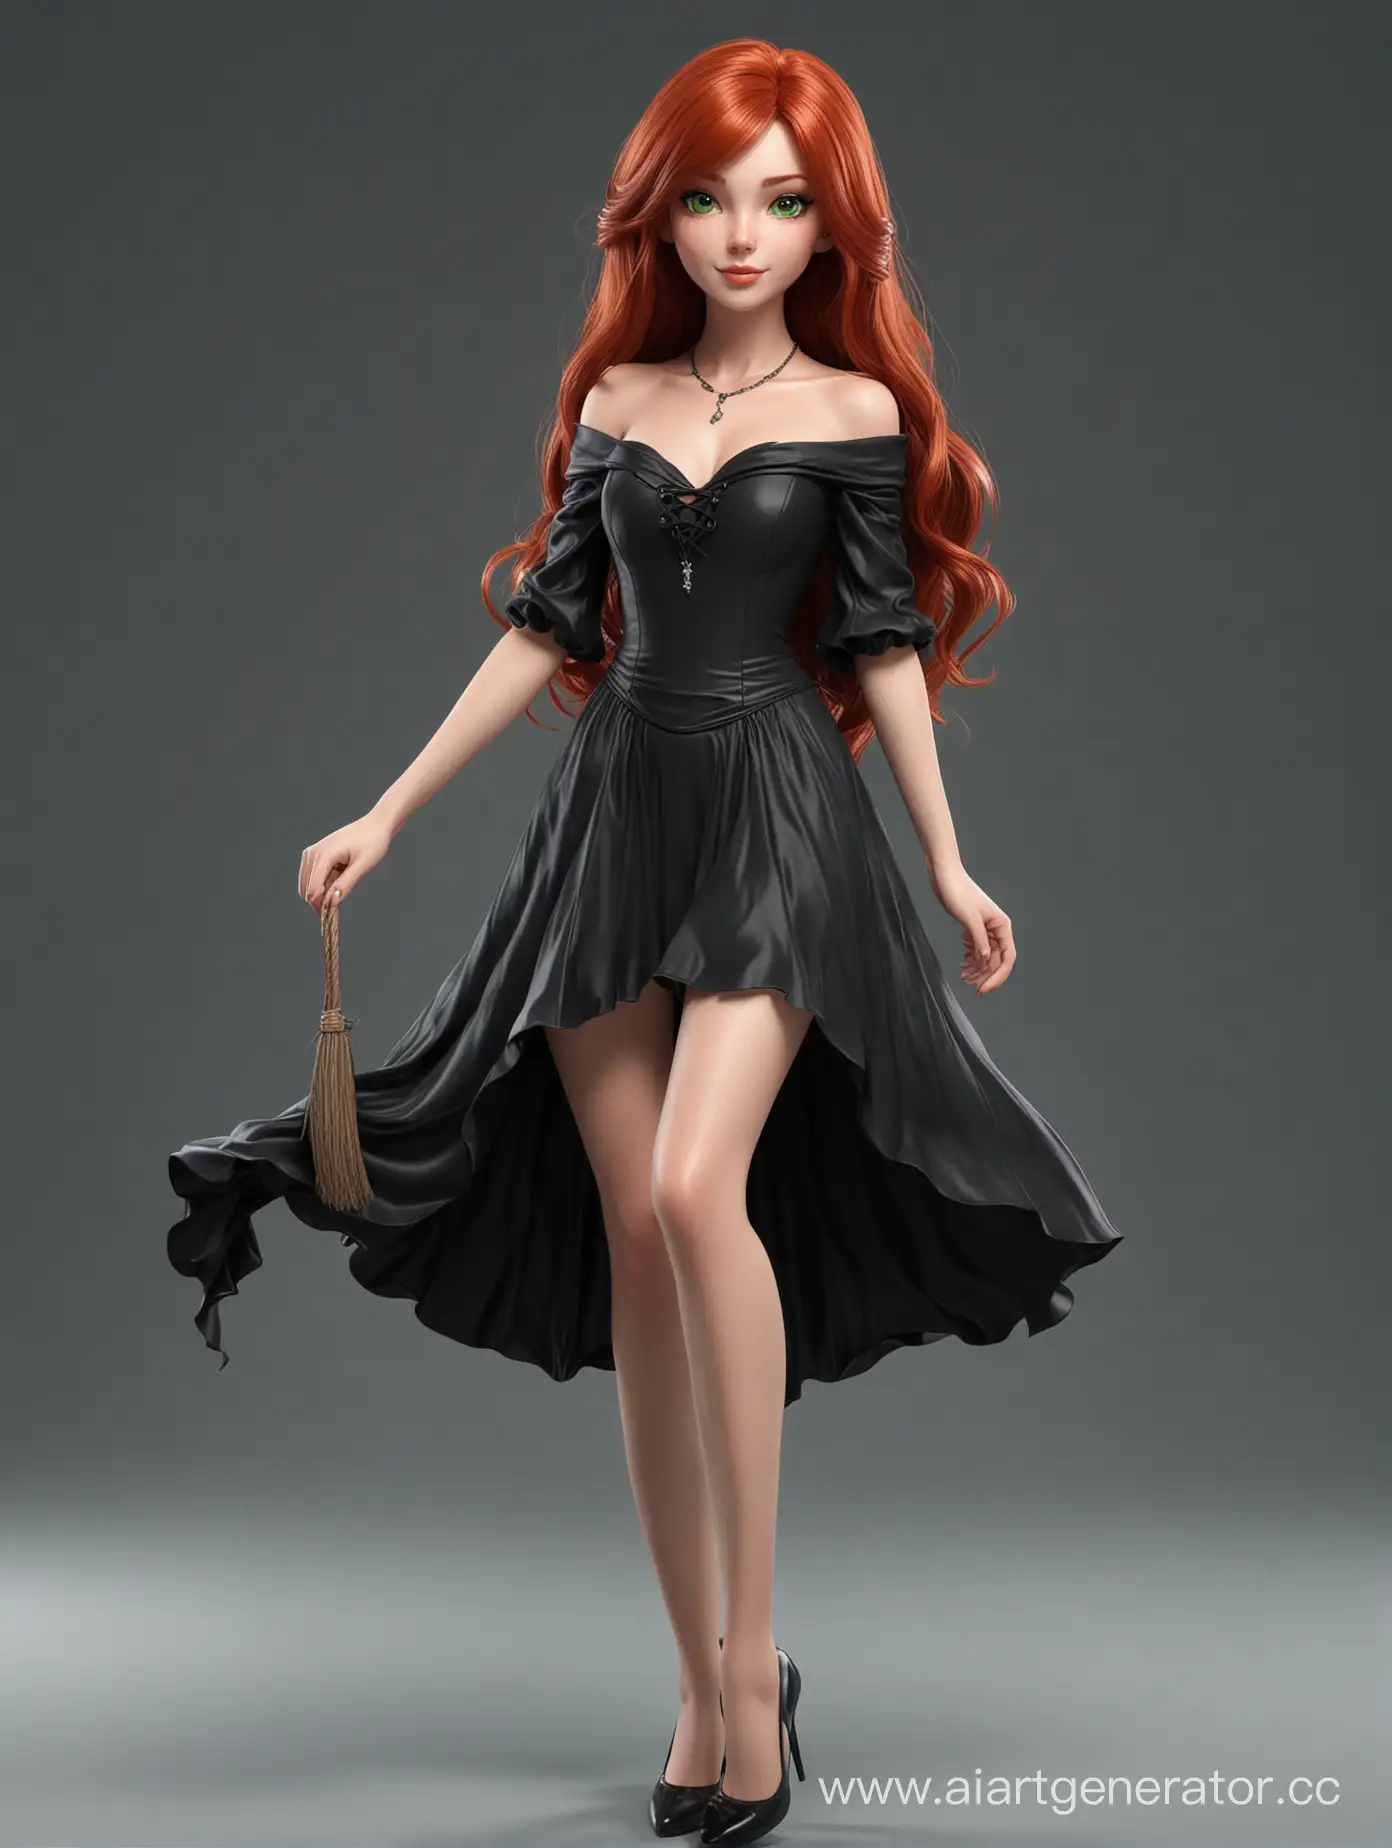 Enchanting-RedHaired-Witch-with-Long-Legs-in-Cute-3D-Cartoon-Style